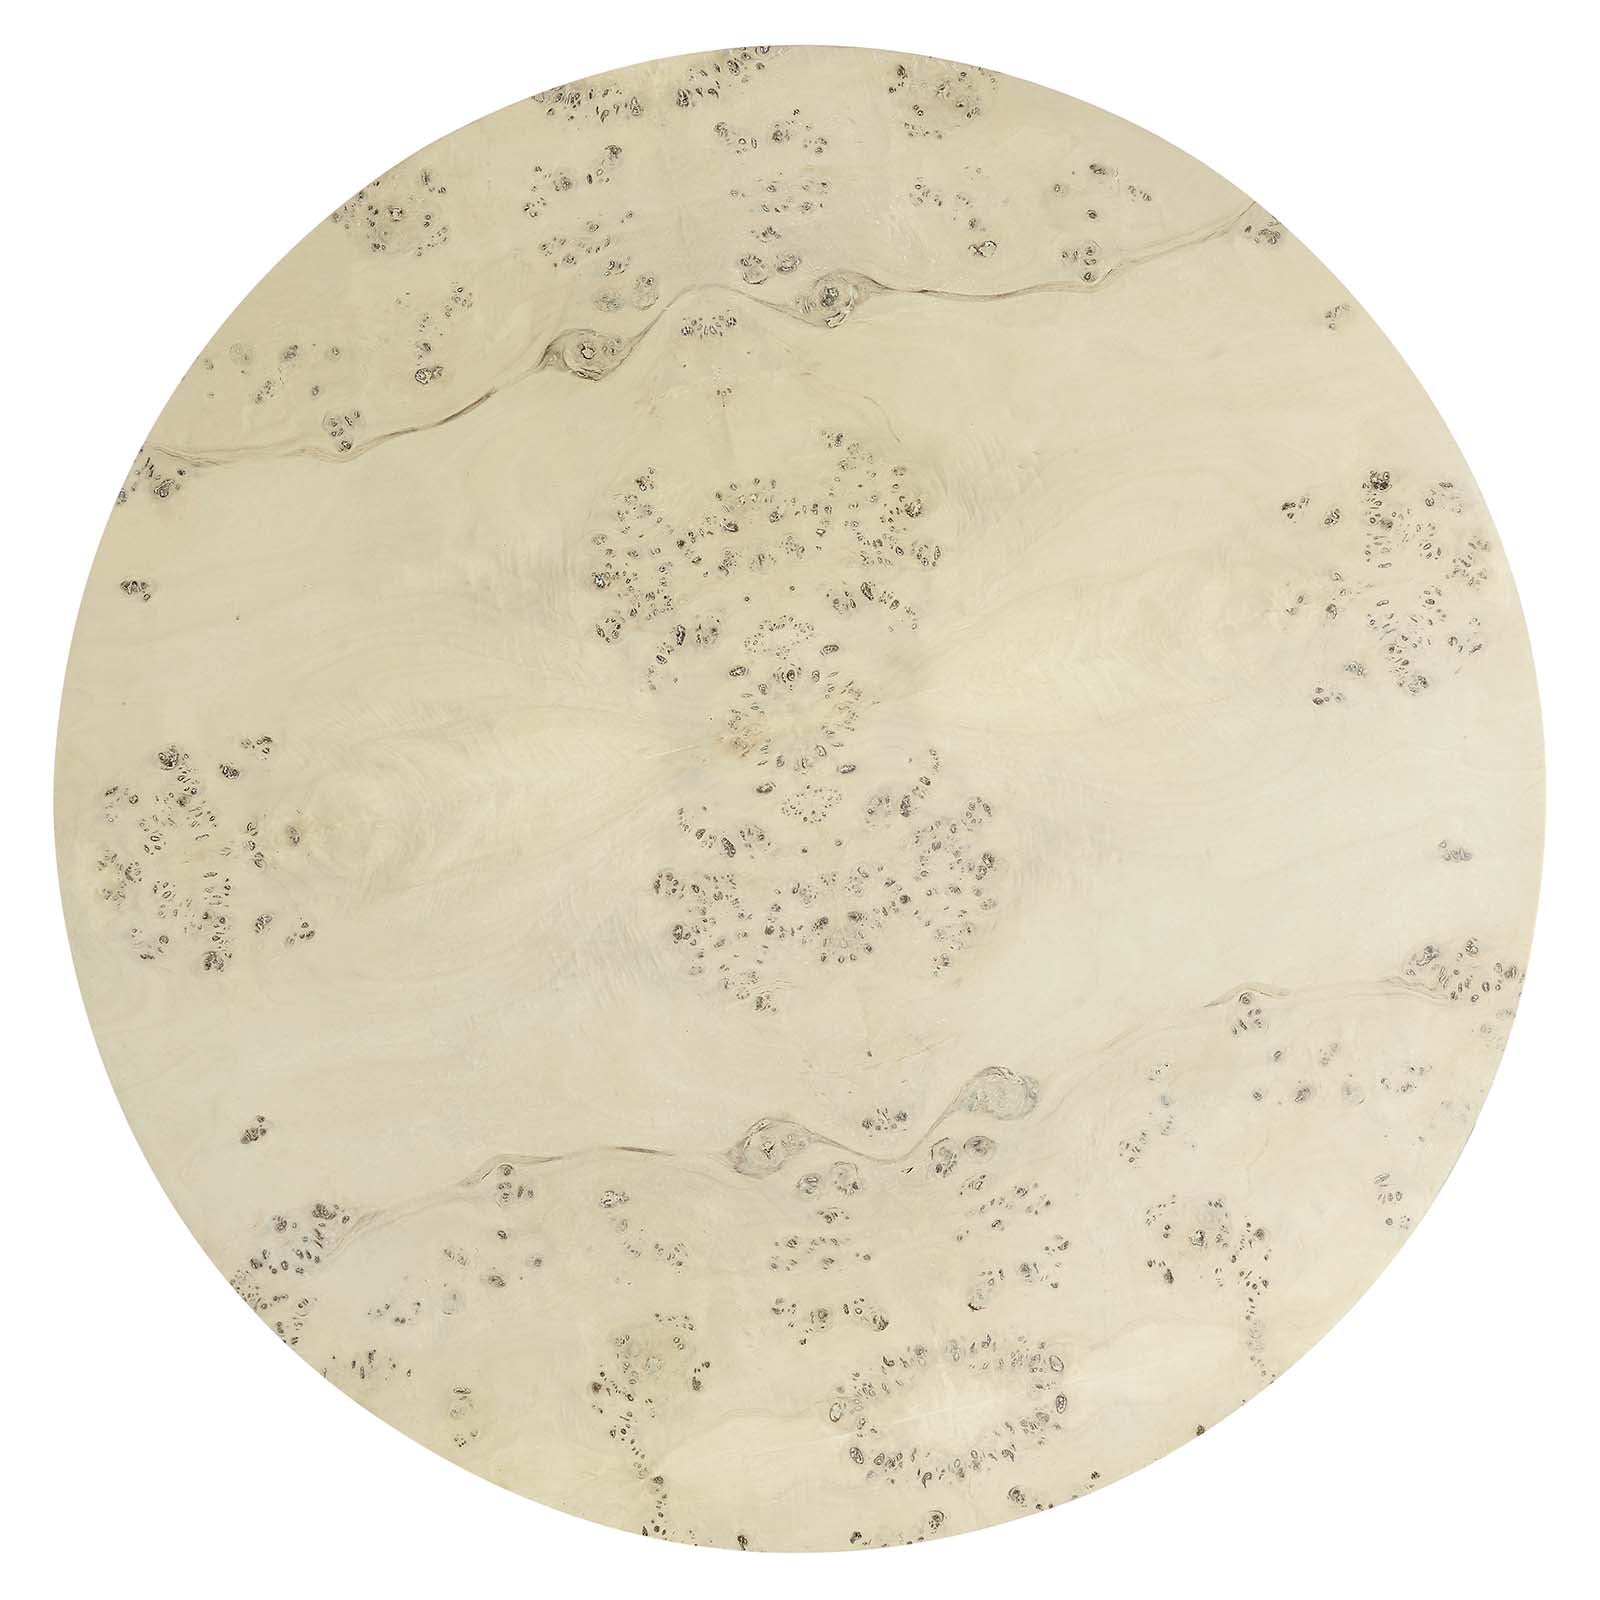 Cosmos 35" Round Burl Wood Coffee Table